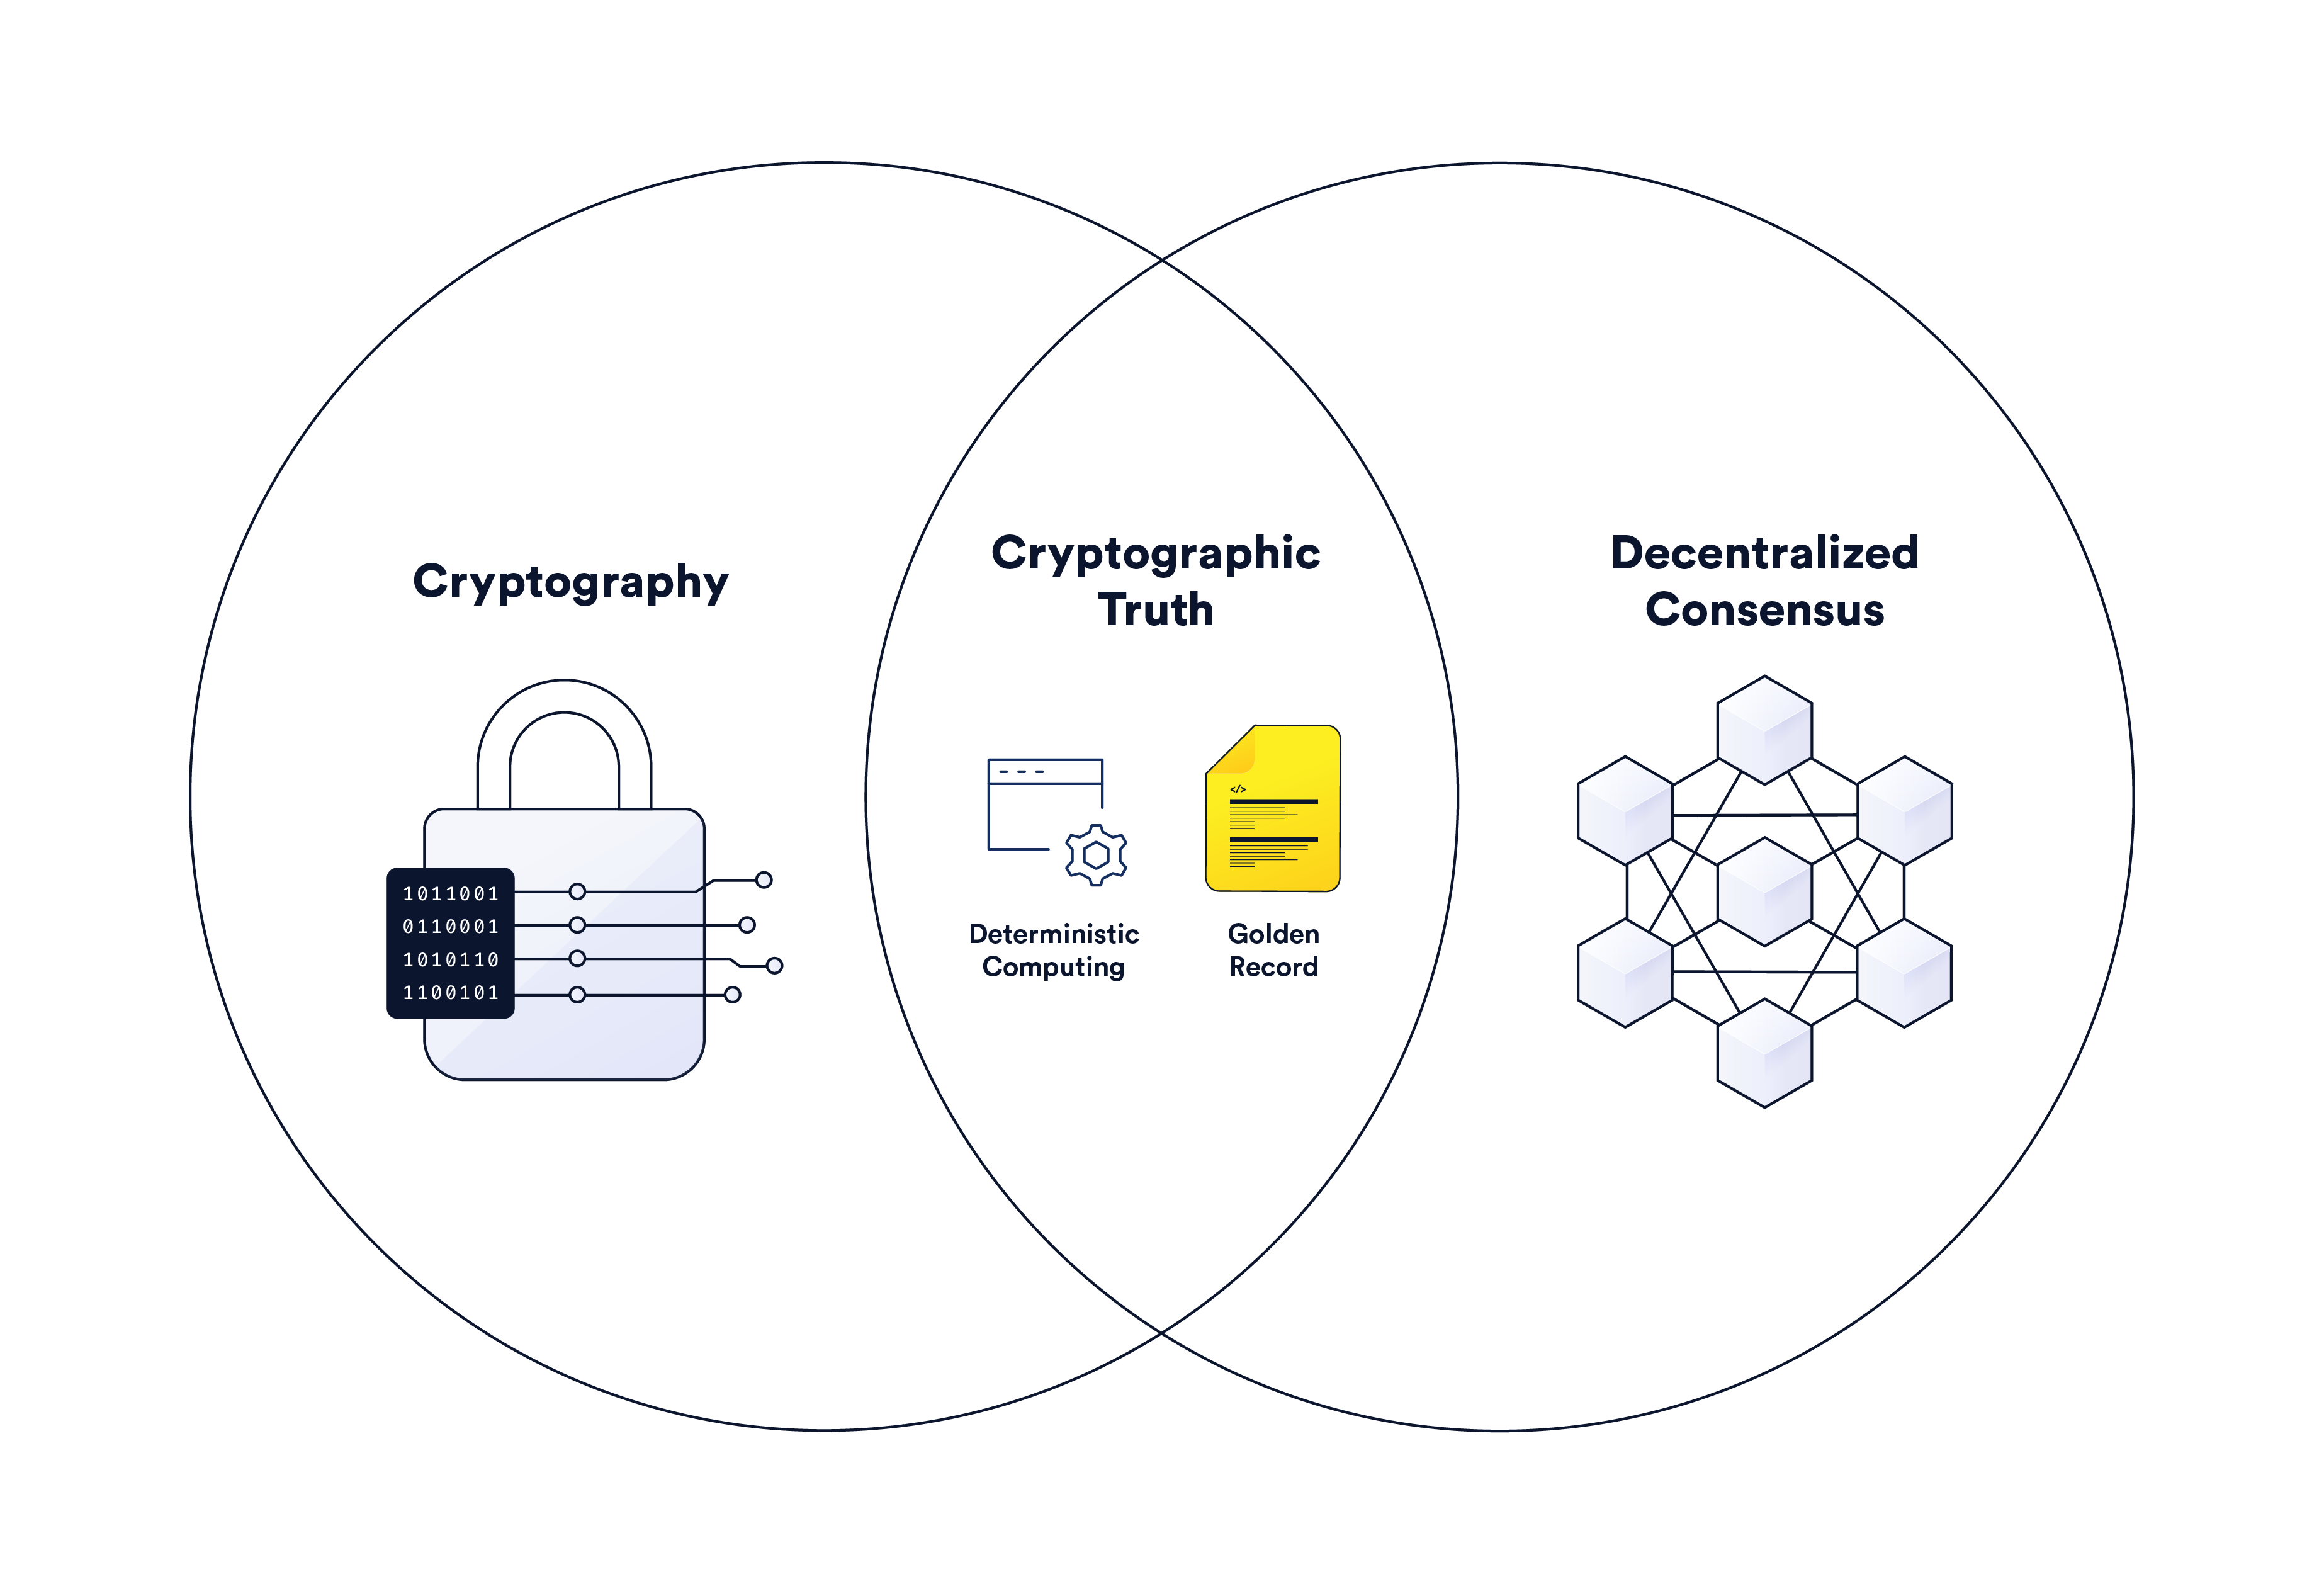 Cryptographic truth in Web3